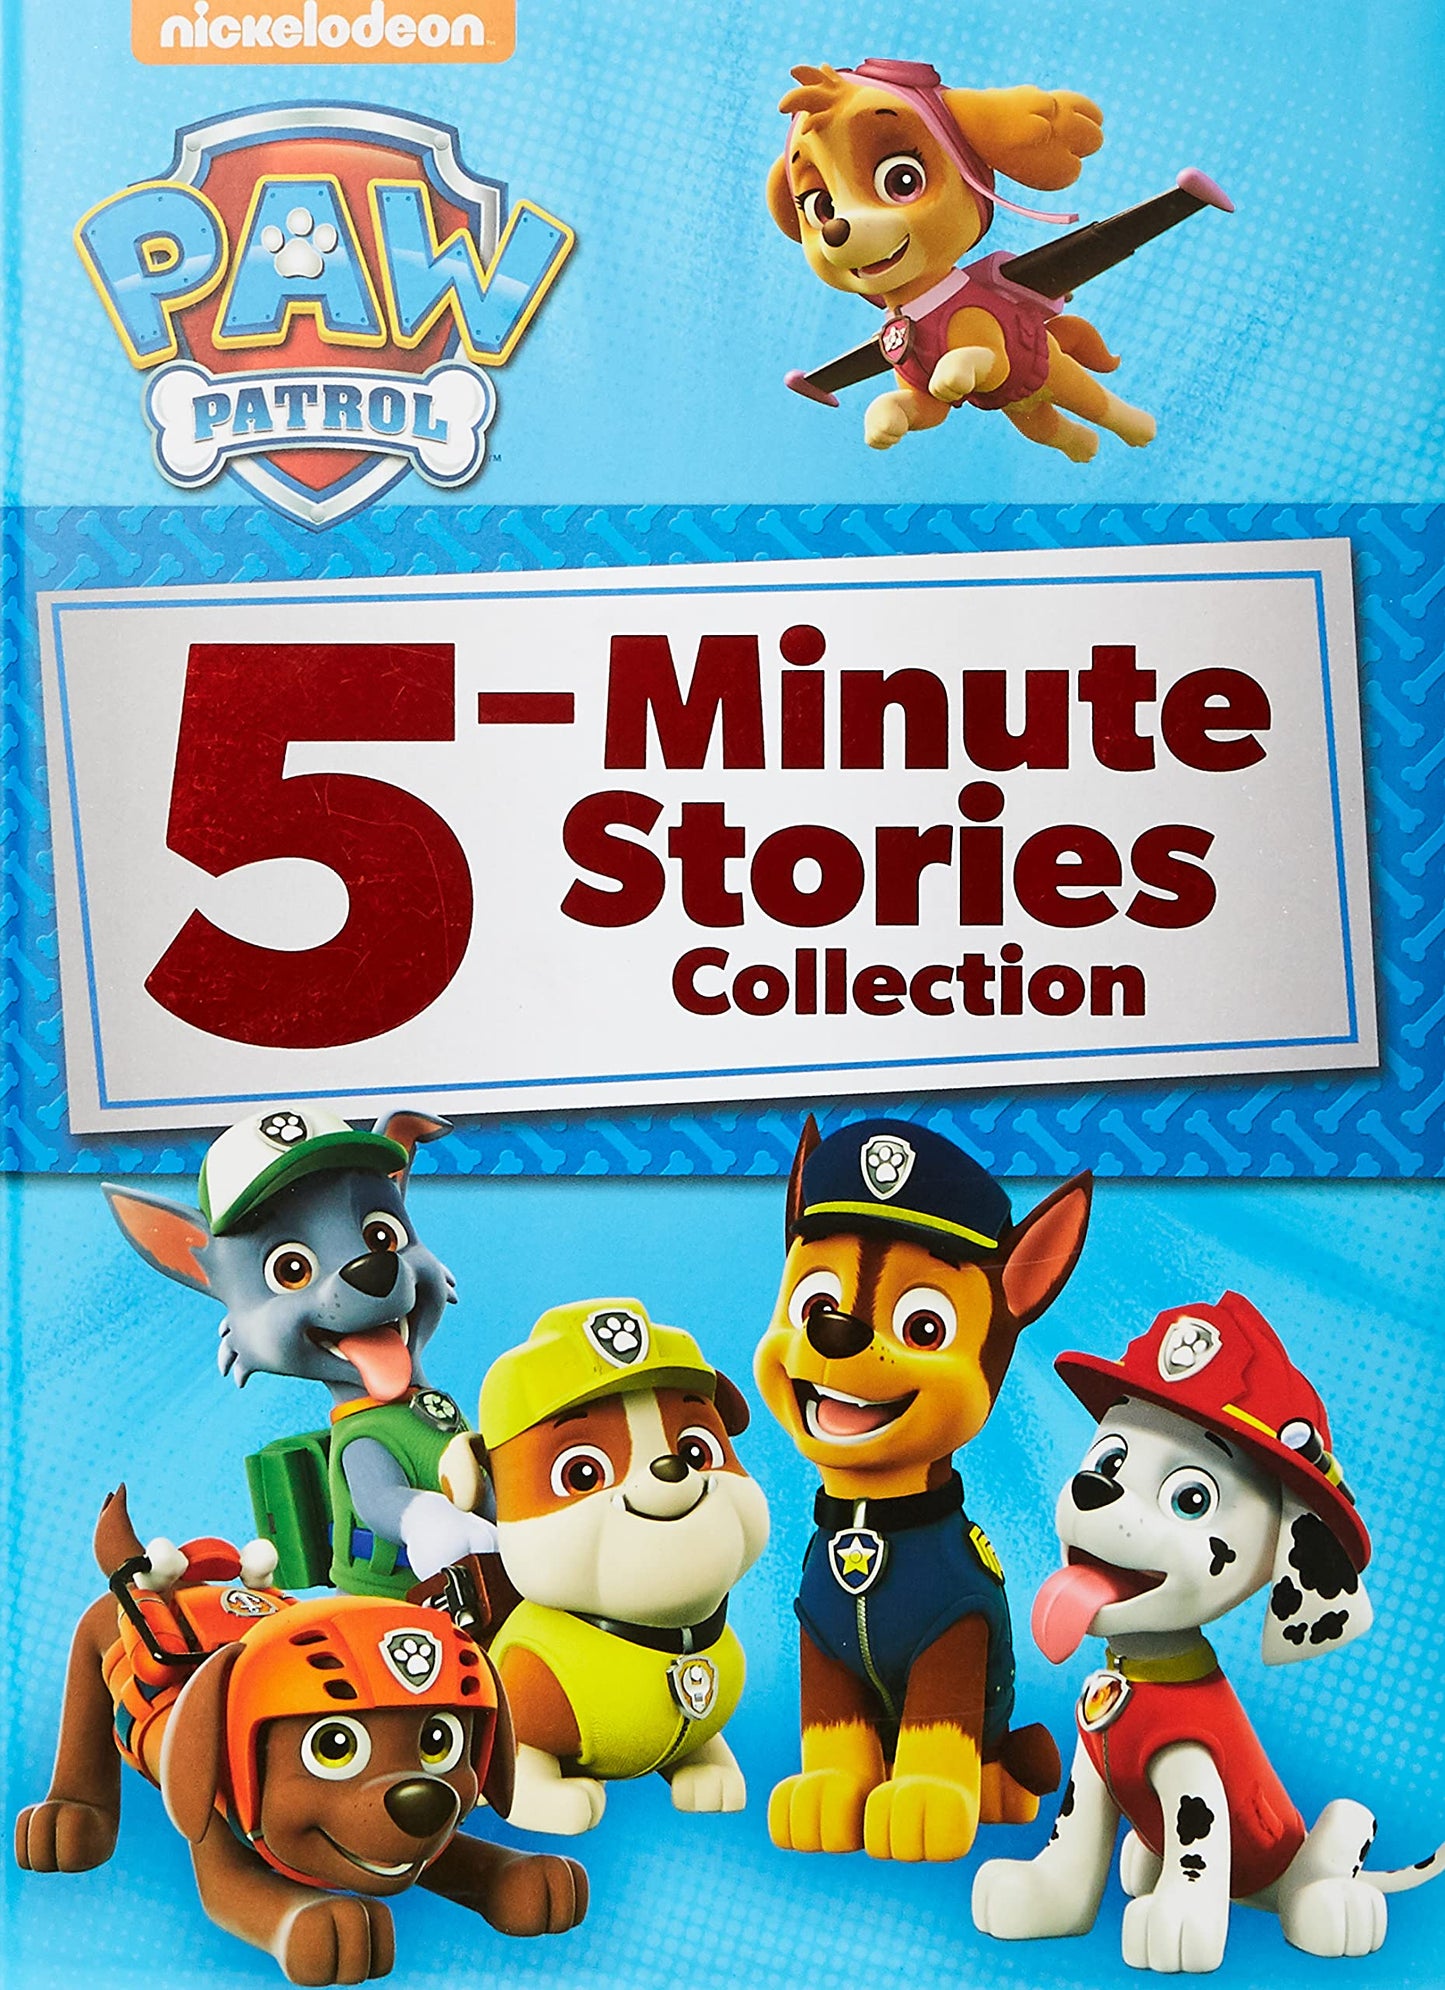 PAW PATROL 5-MINUTE STORIES COLLECTION